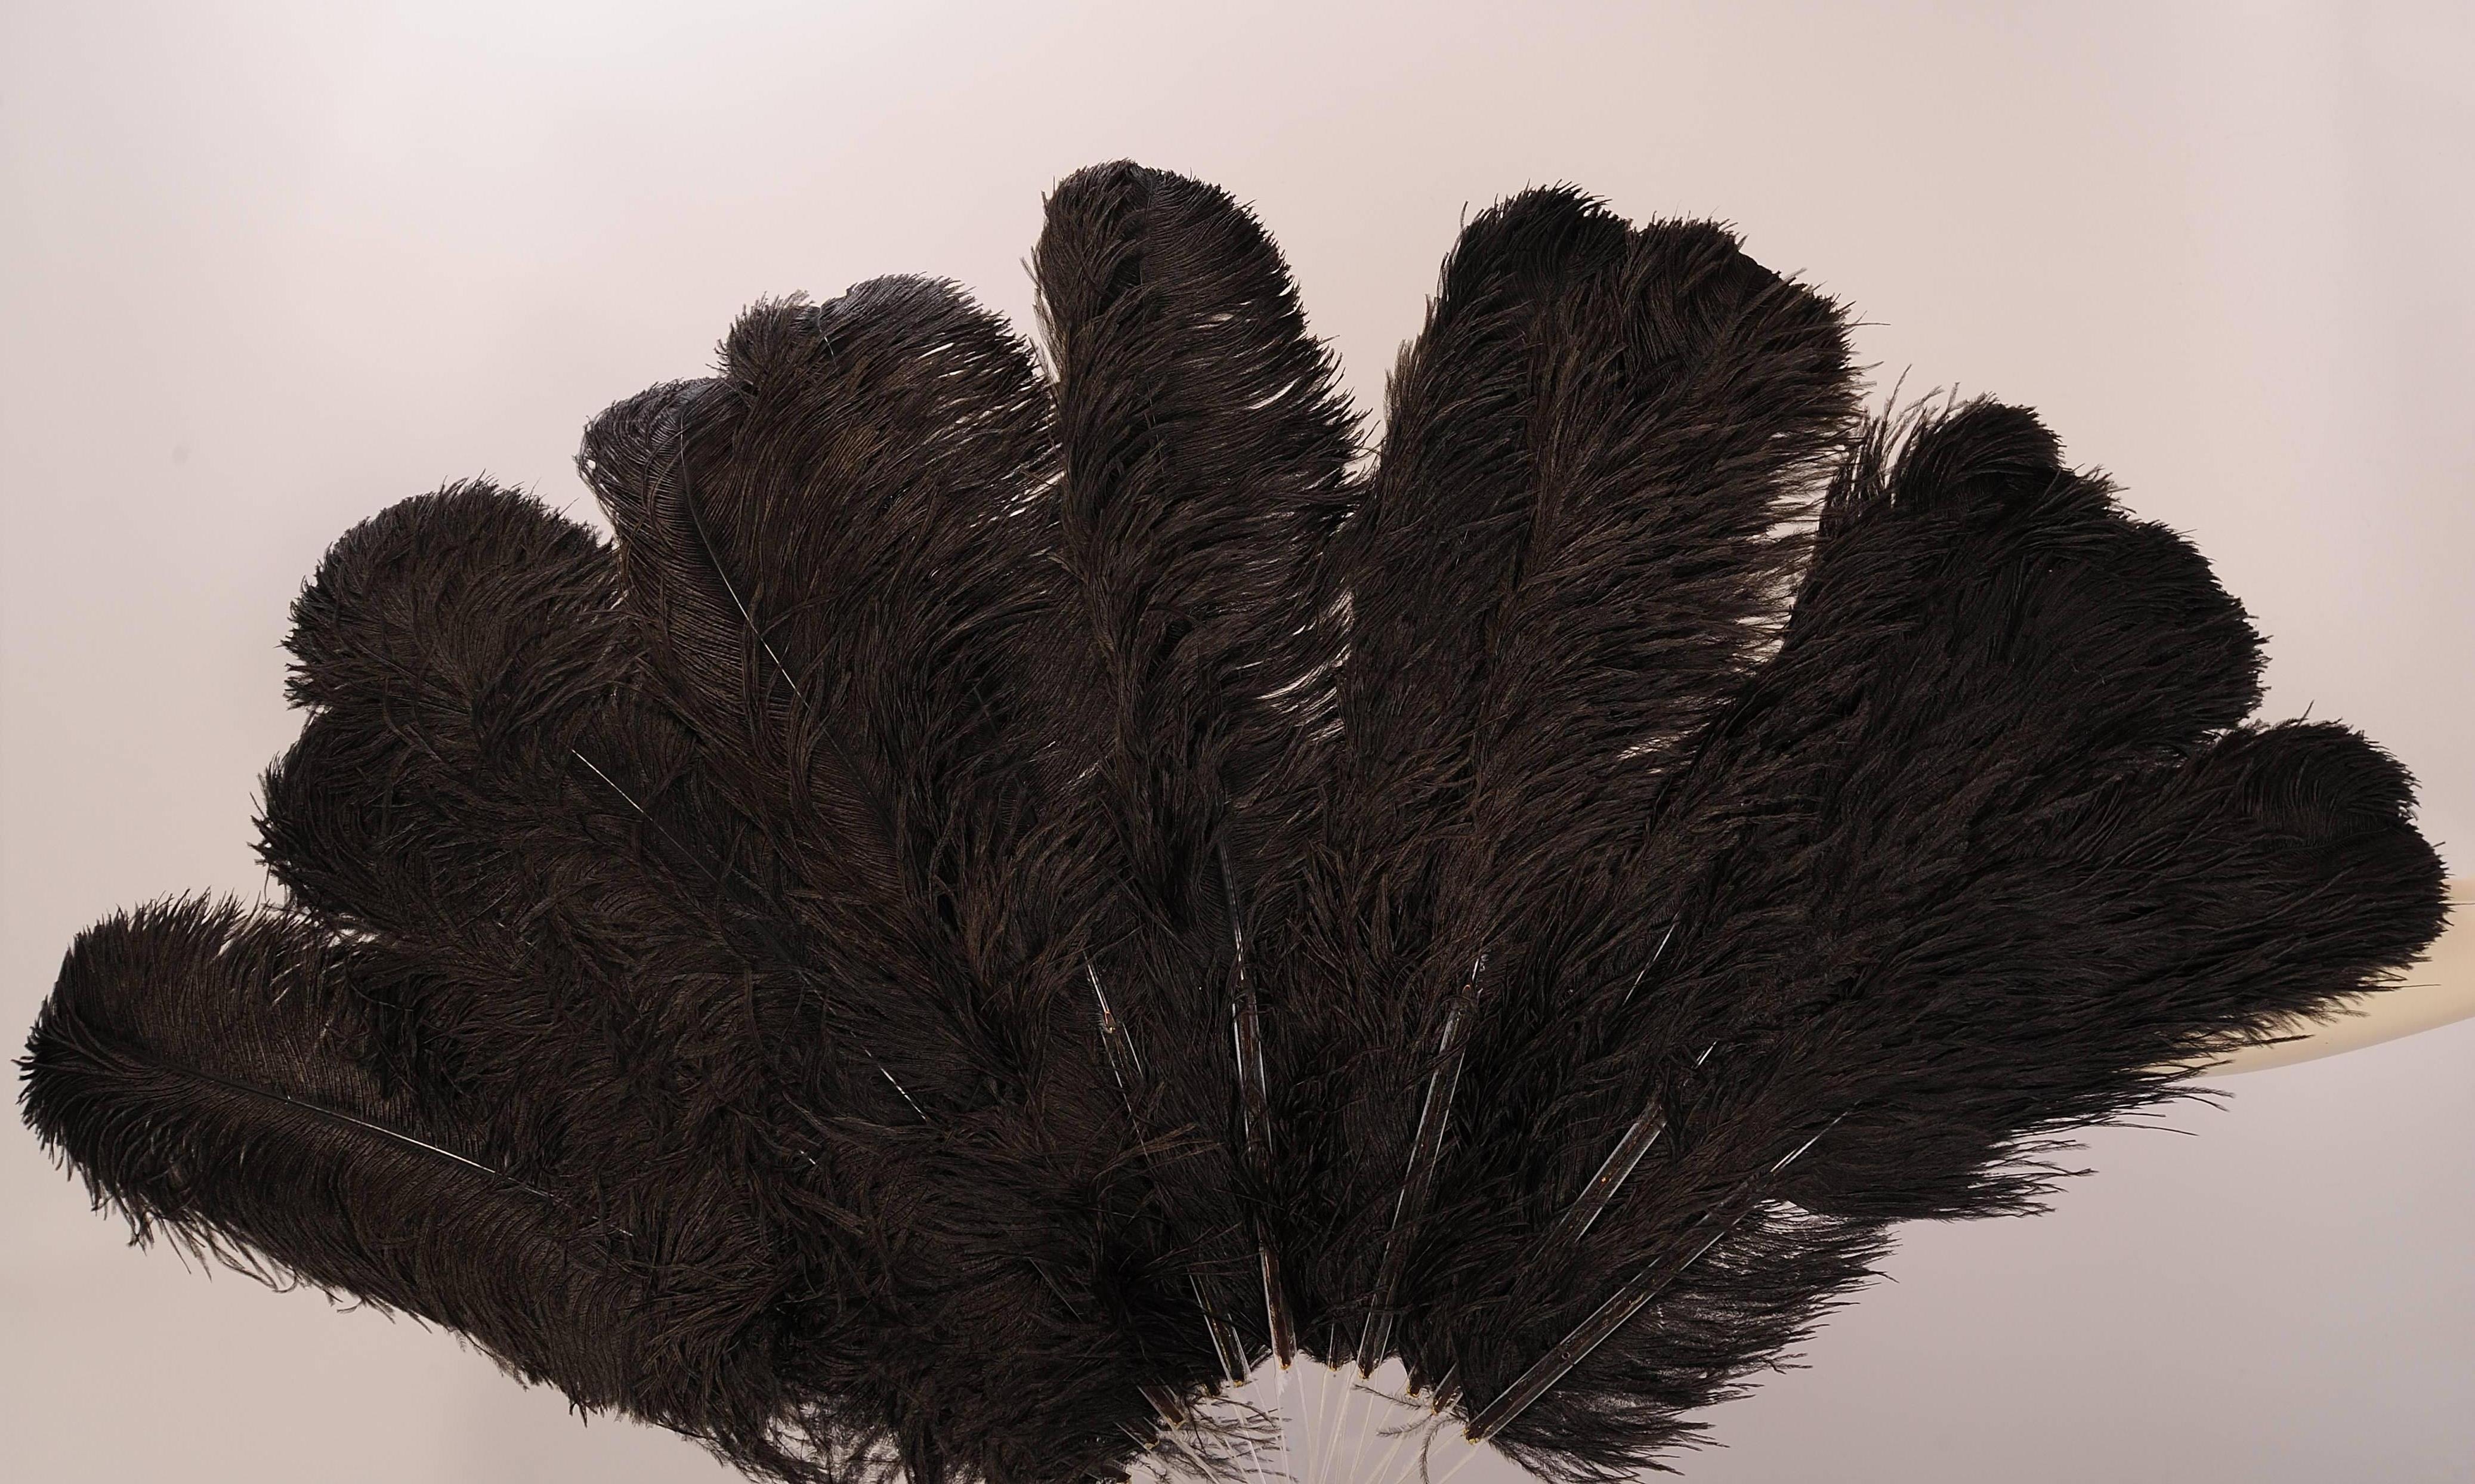 Women's or Men's Patrick Kelly Atelier Giant Lucite and Black Ostrich Feather Fans, Runway 1989